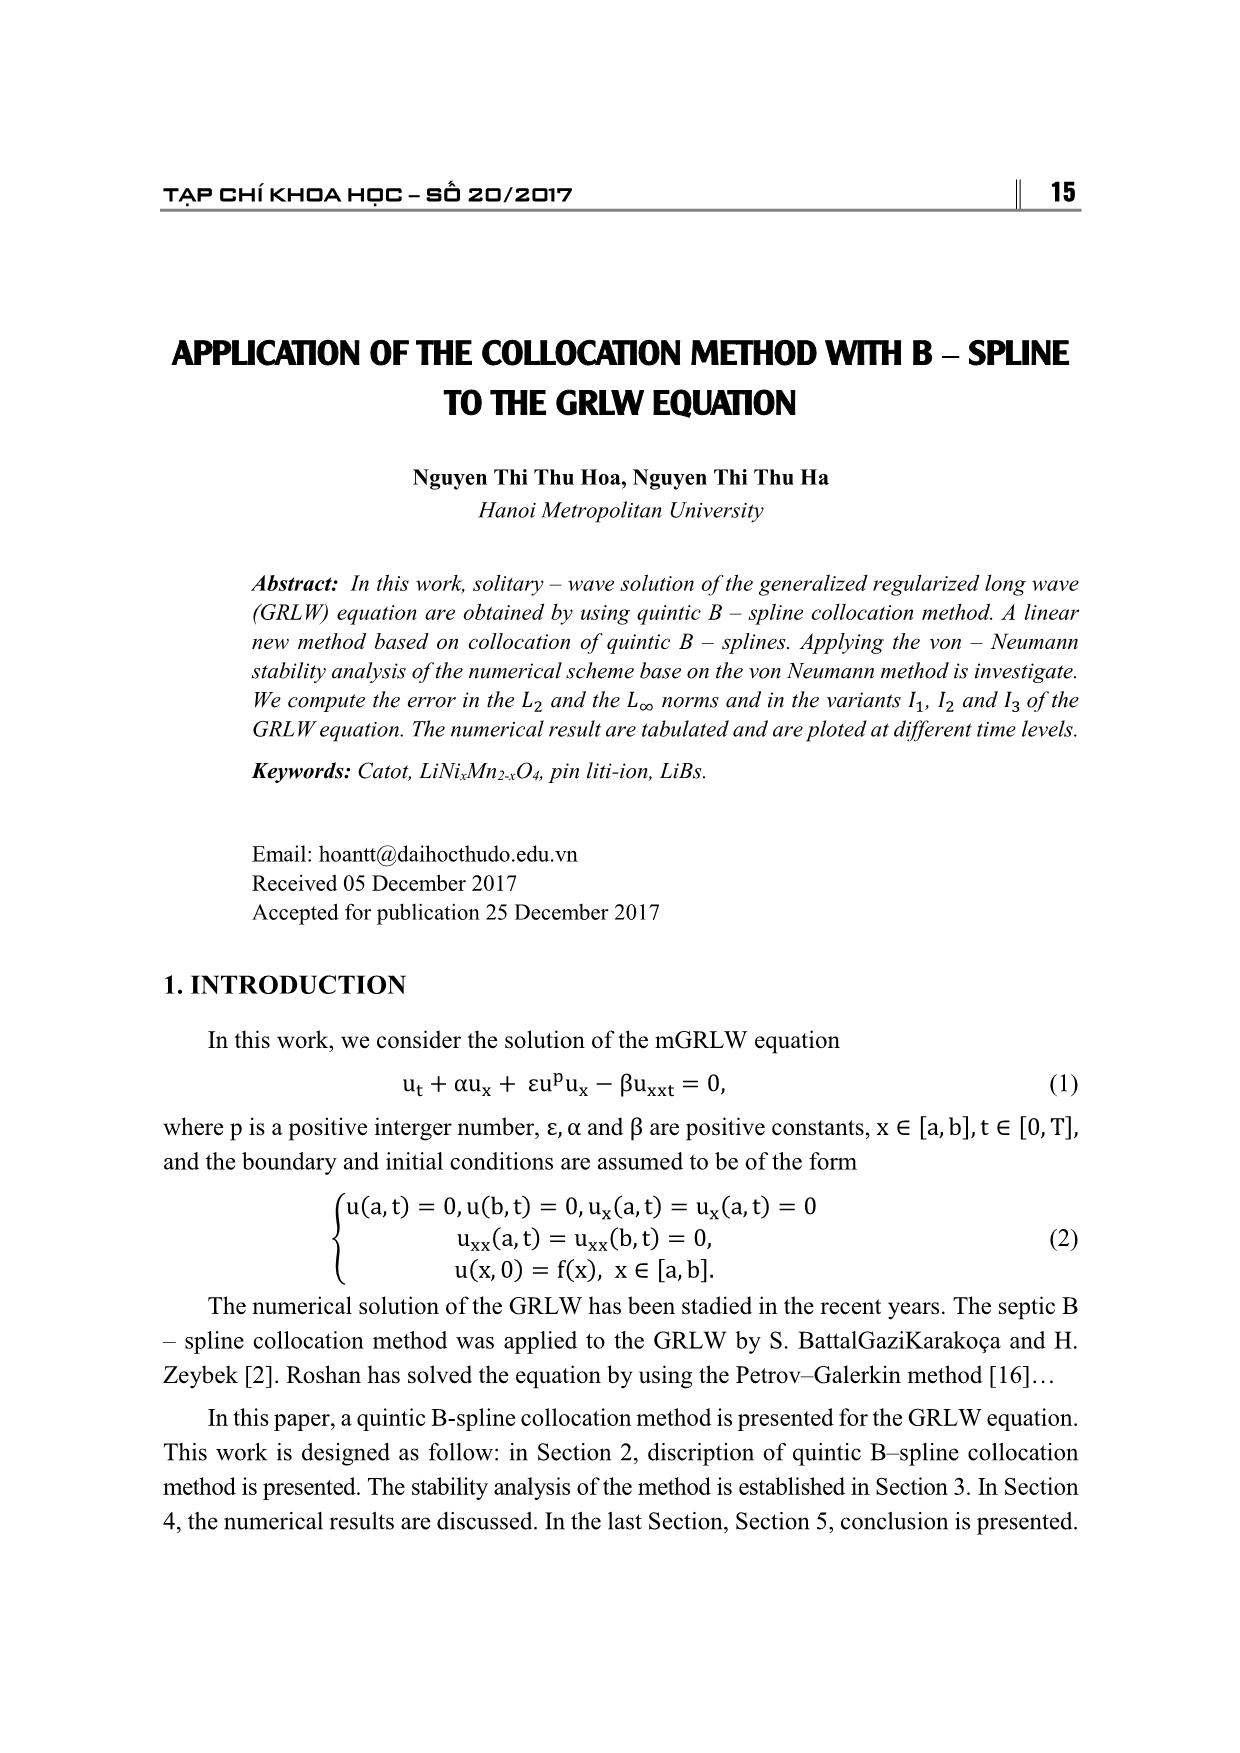 Application of the collocation method with B-spline to the grlw equation trang 1